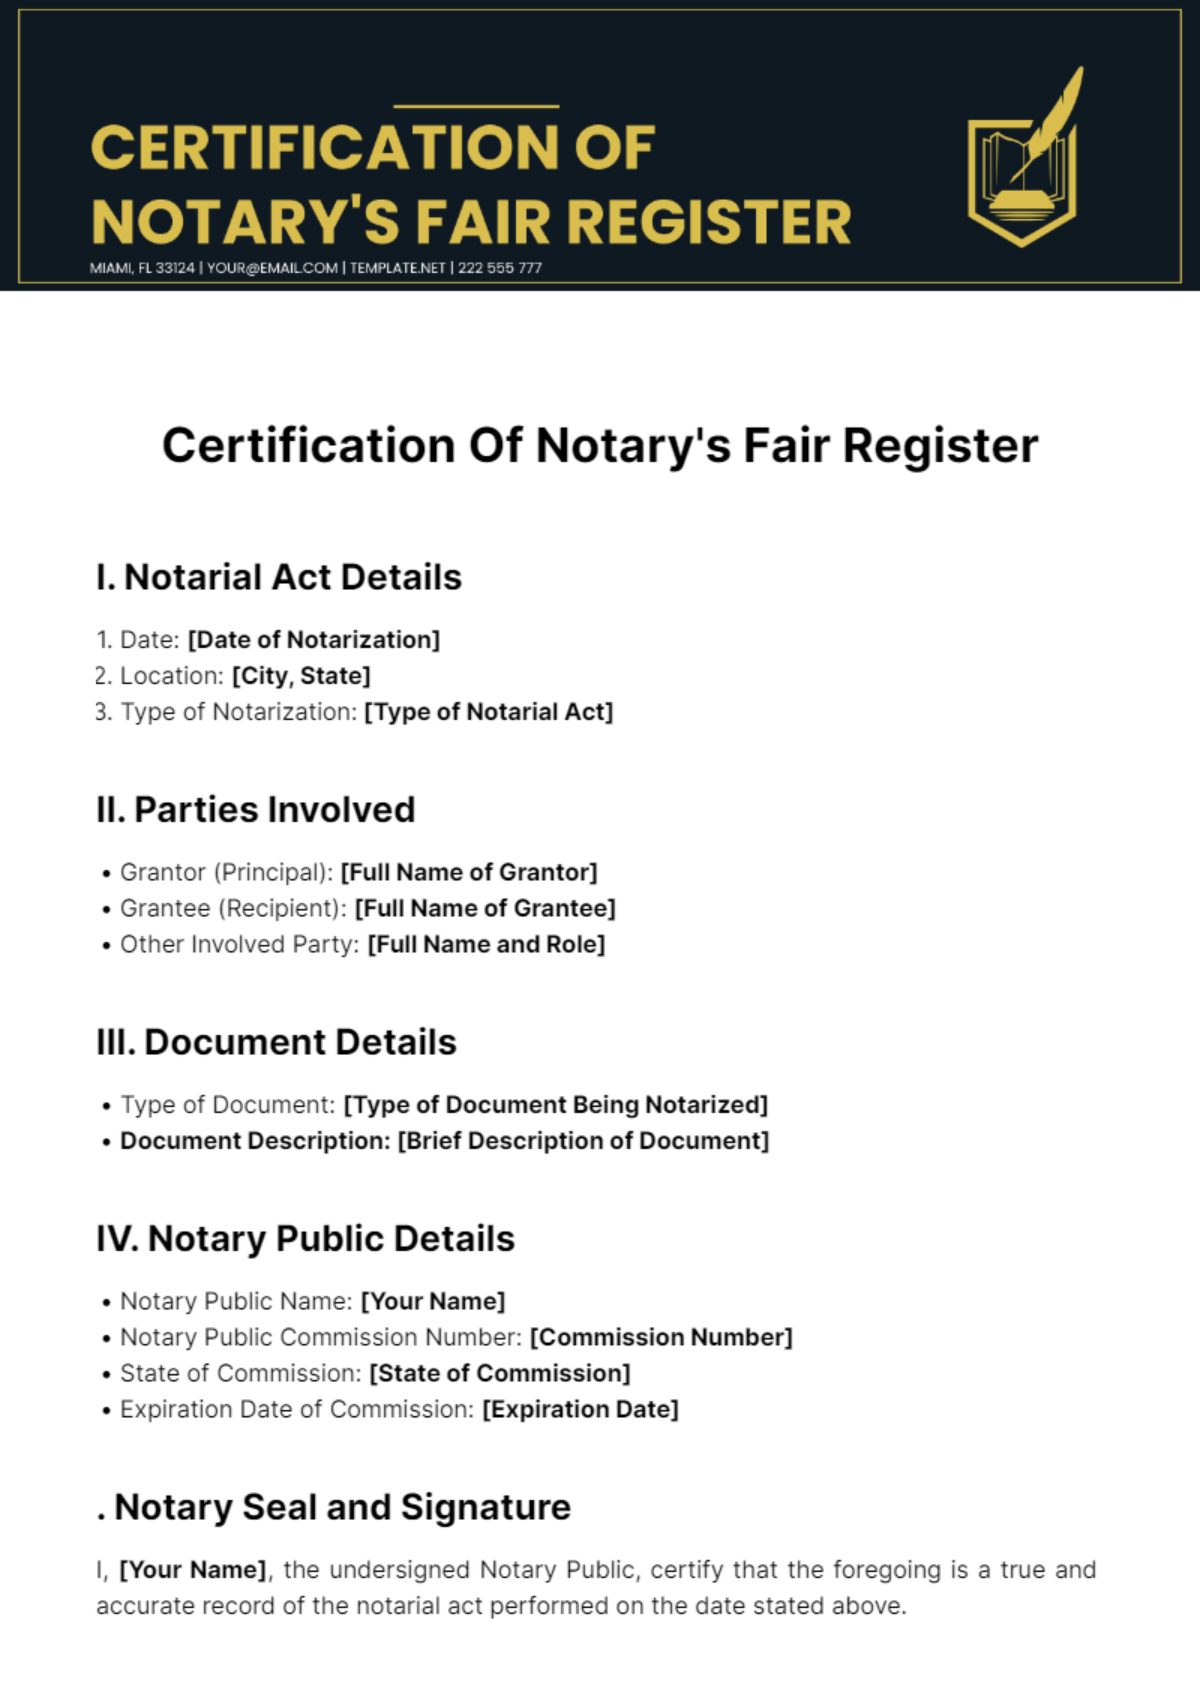 Free Certification Of Notary’s Fair Register Template